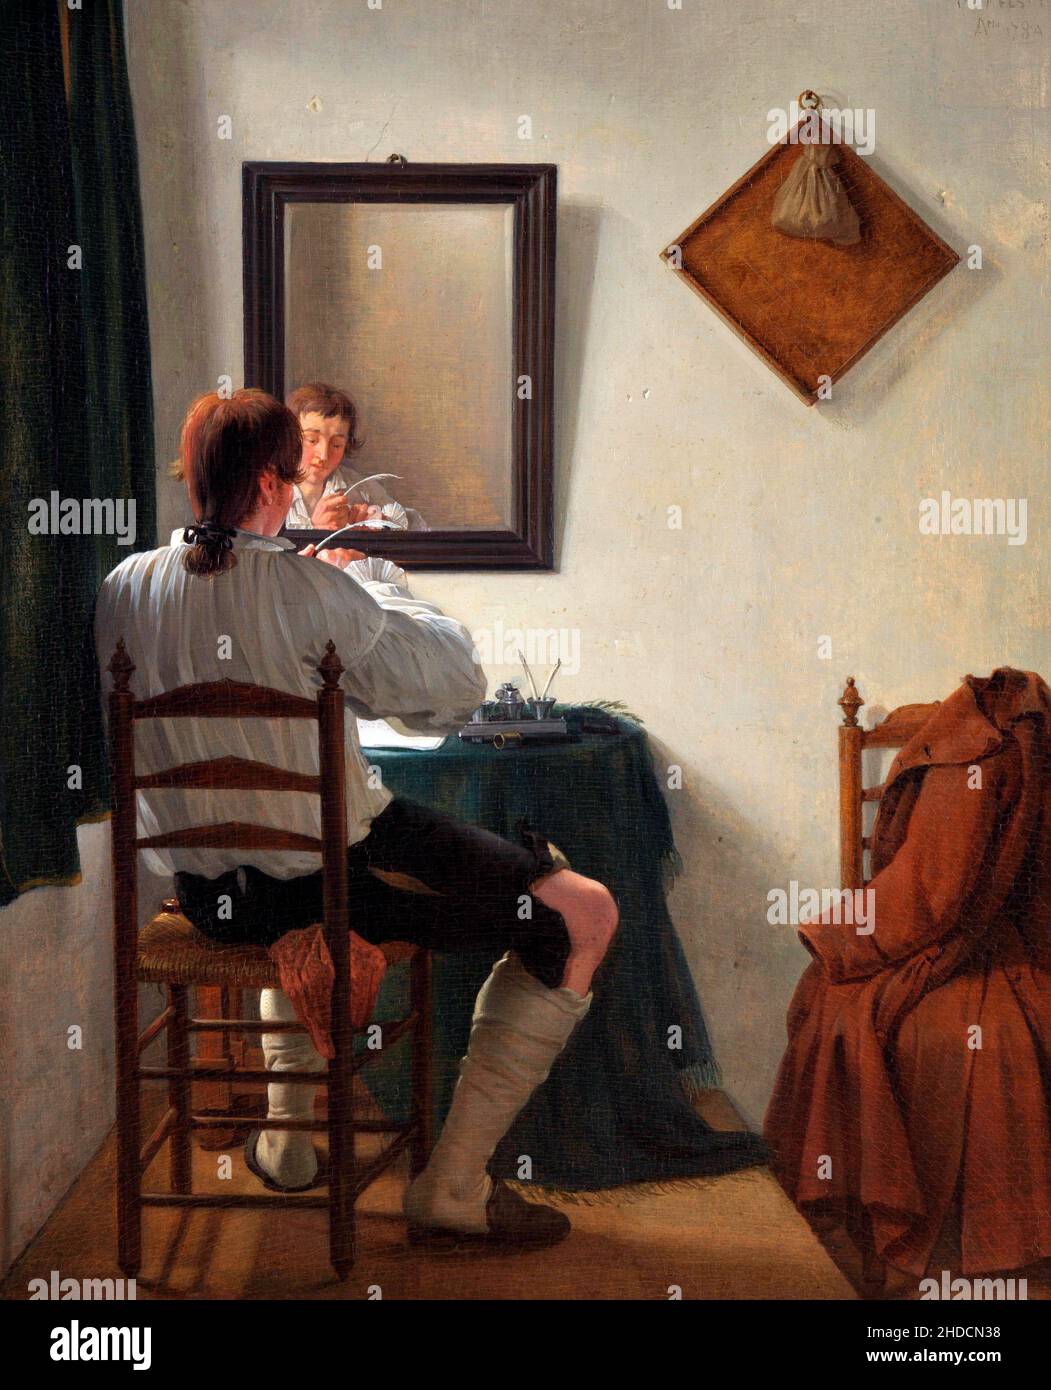 A Writer trimming His Pen dell'artista olandese Jan Ekels The Younger (1759-1793), Oil on Panel, 1784 Foto Stock